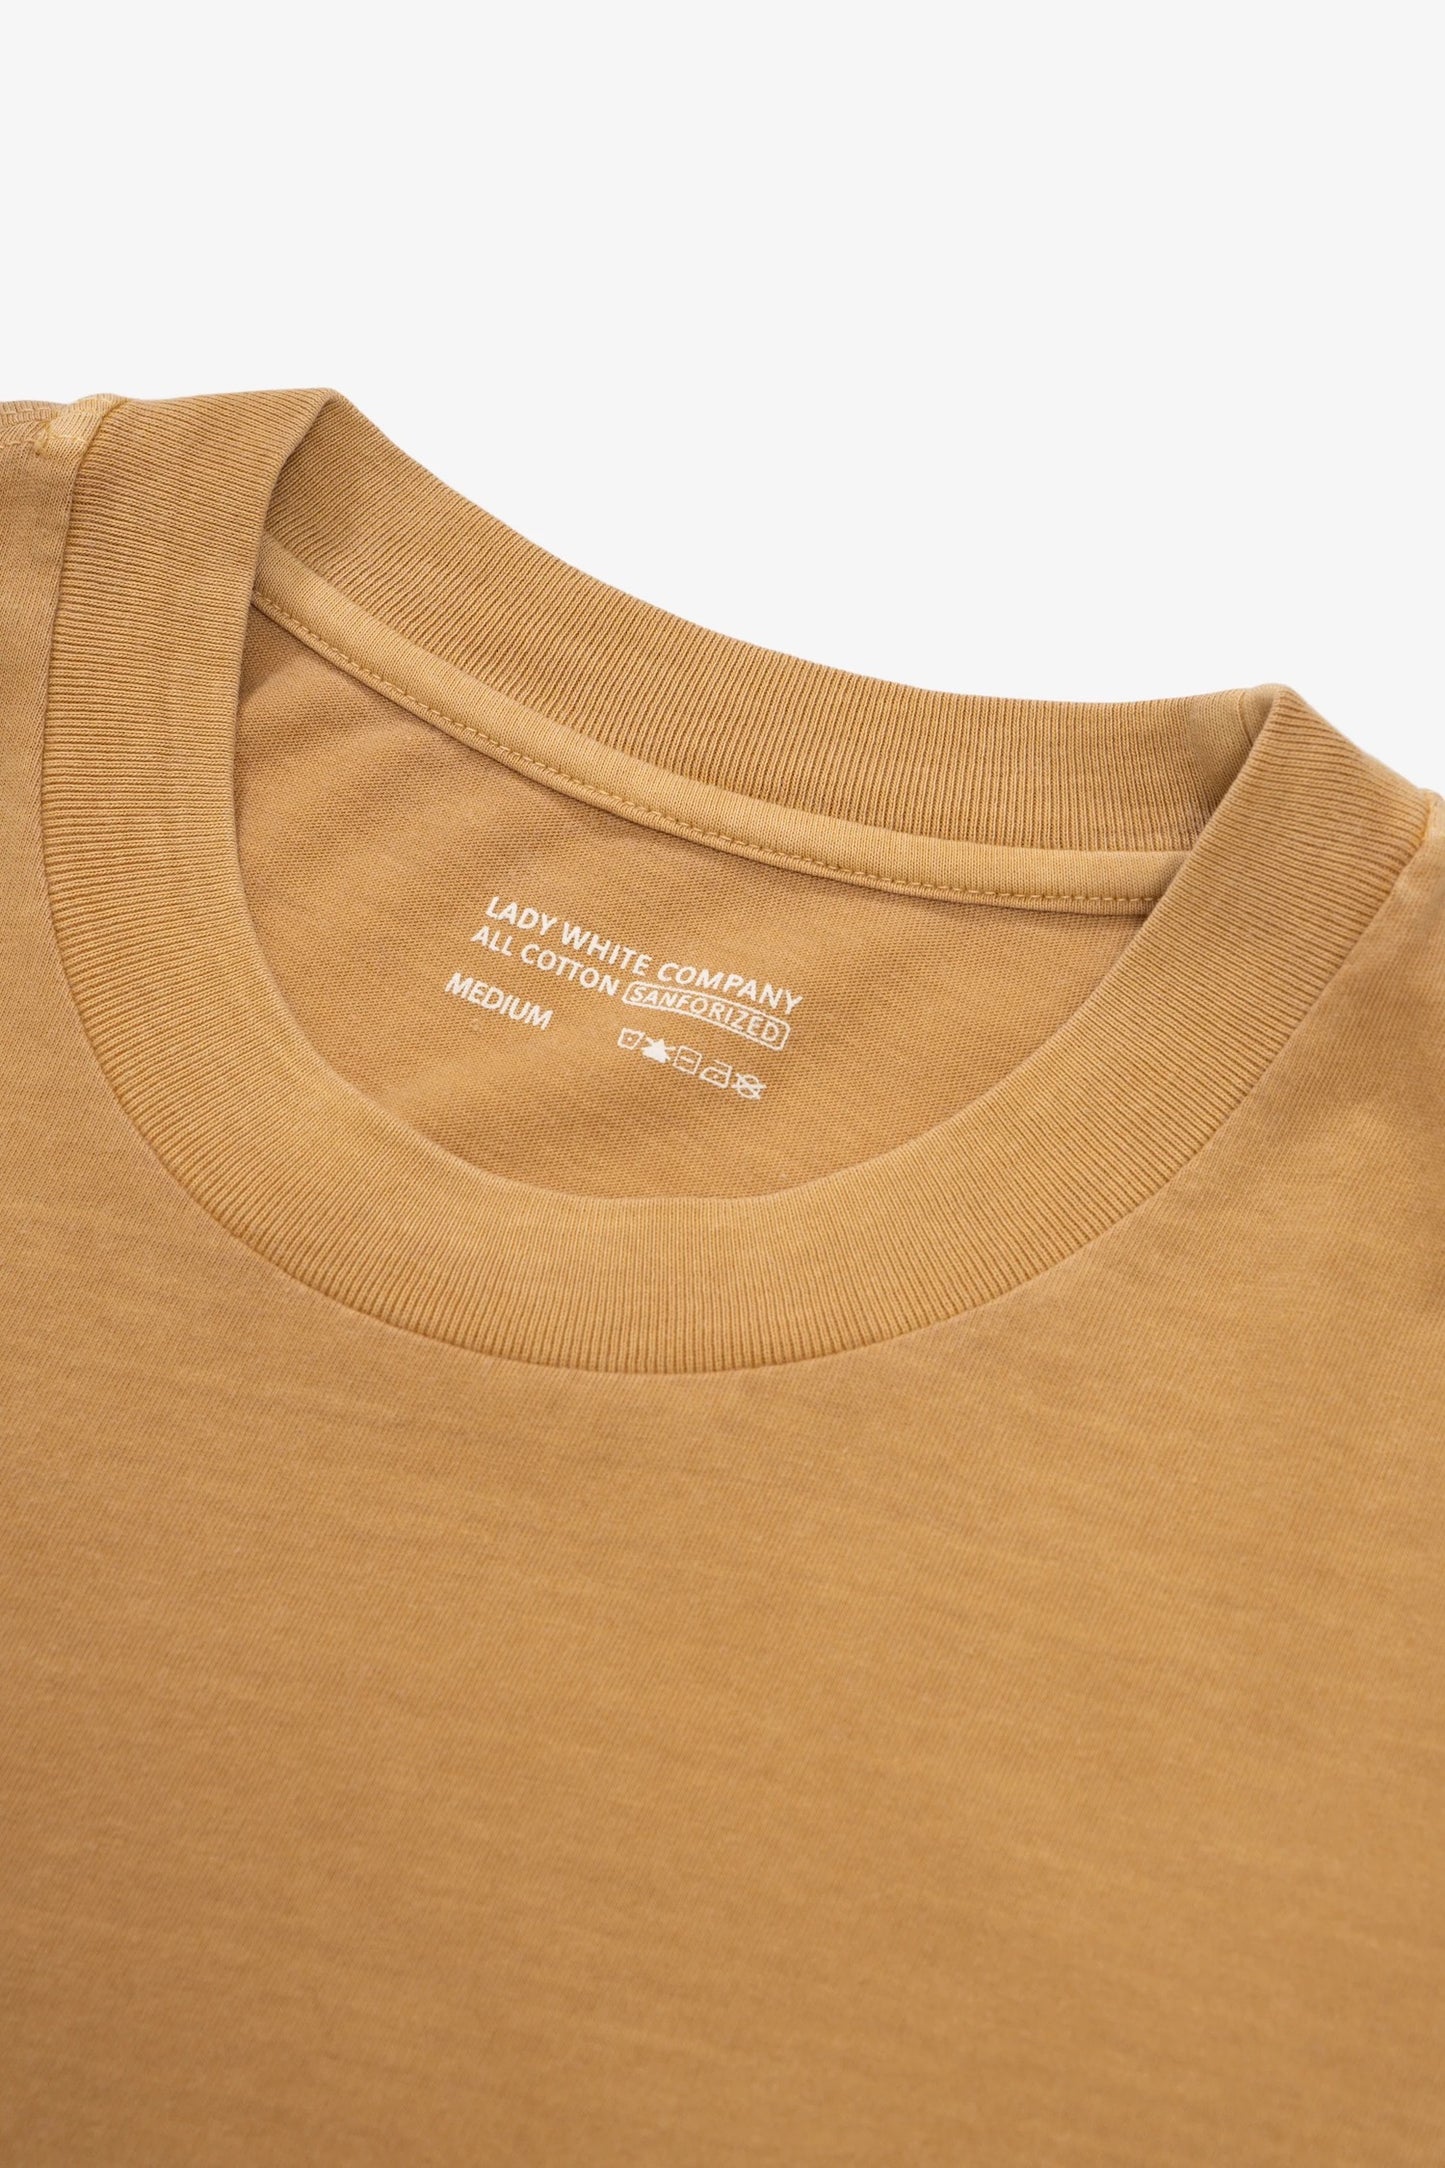 LADY WHITE CO. ATHENS T-SHIRT - MUSTARD PIGMENT